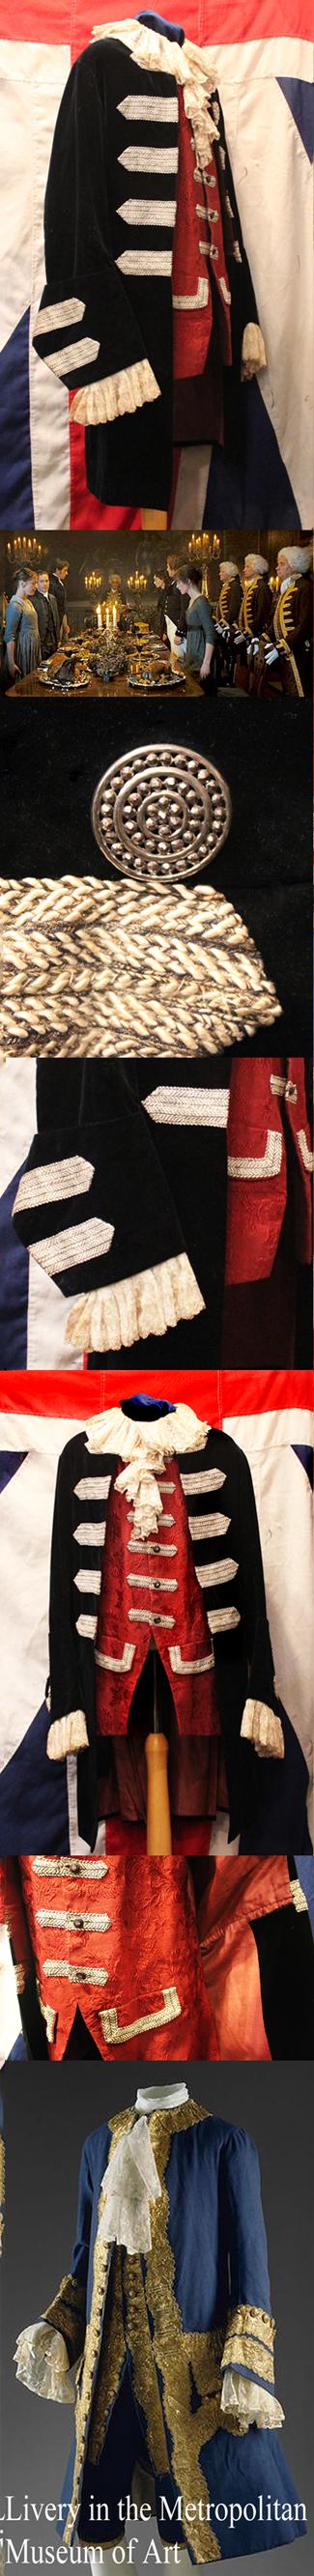 A Superb 'Valet de Pied a la Maison' Footman's Livery Frock Coat, in Dark Blue Velvet, Silk Damask, Silver Bullion and Fine Lace, With Handmade Cut-Steel Marquesite Buttonning